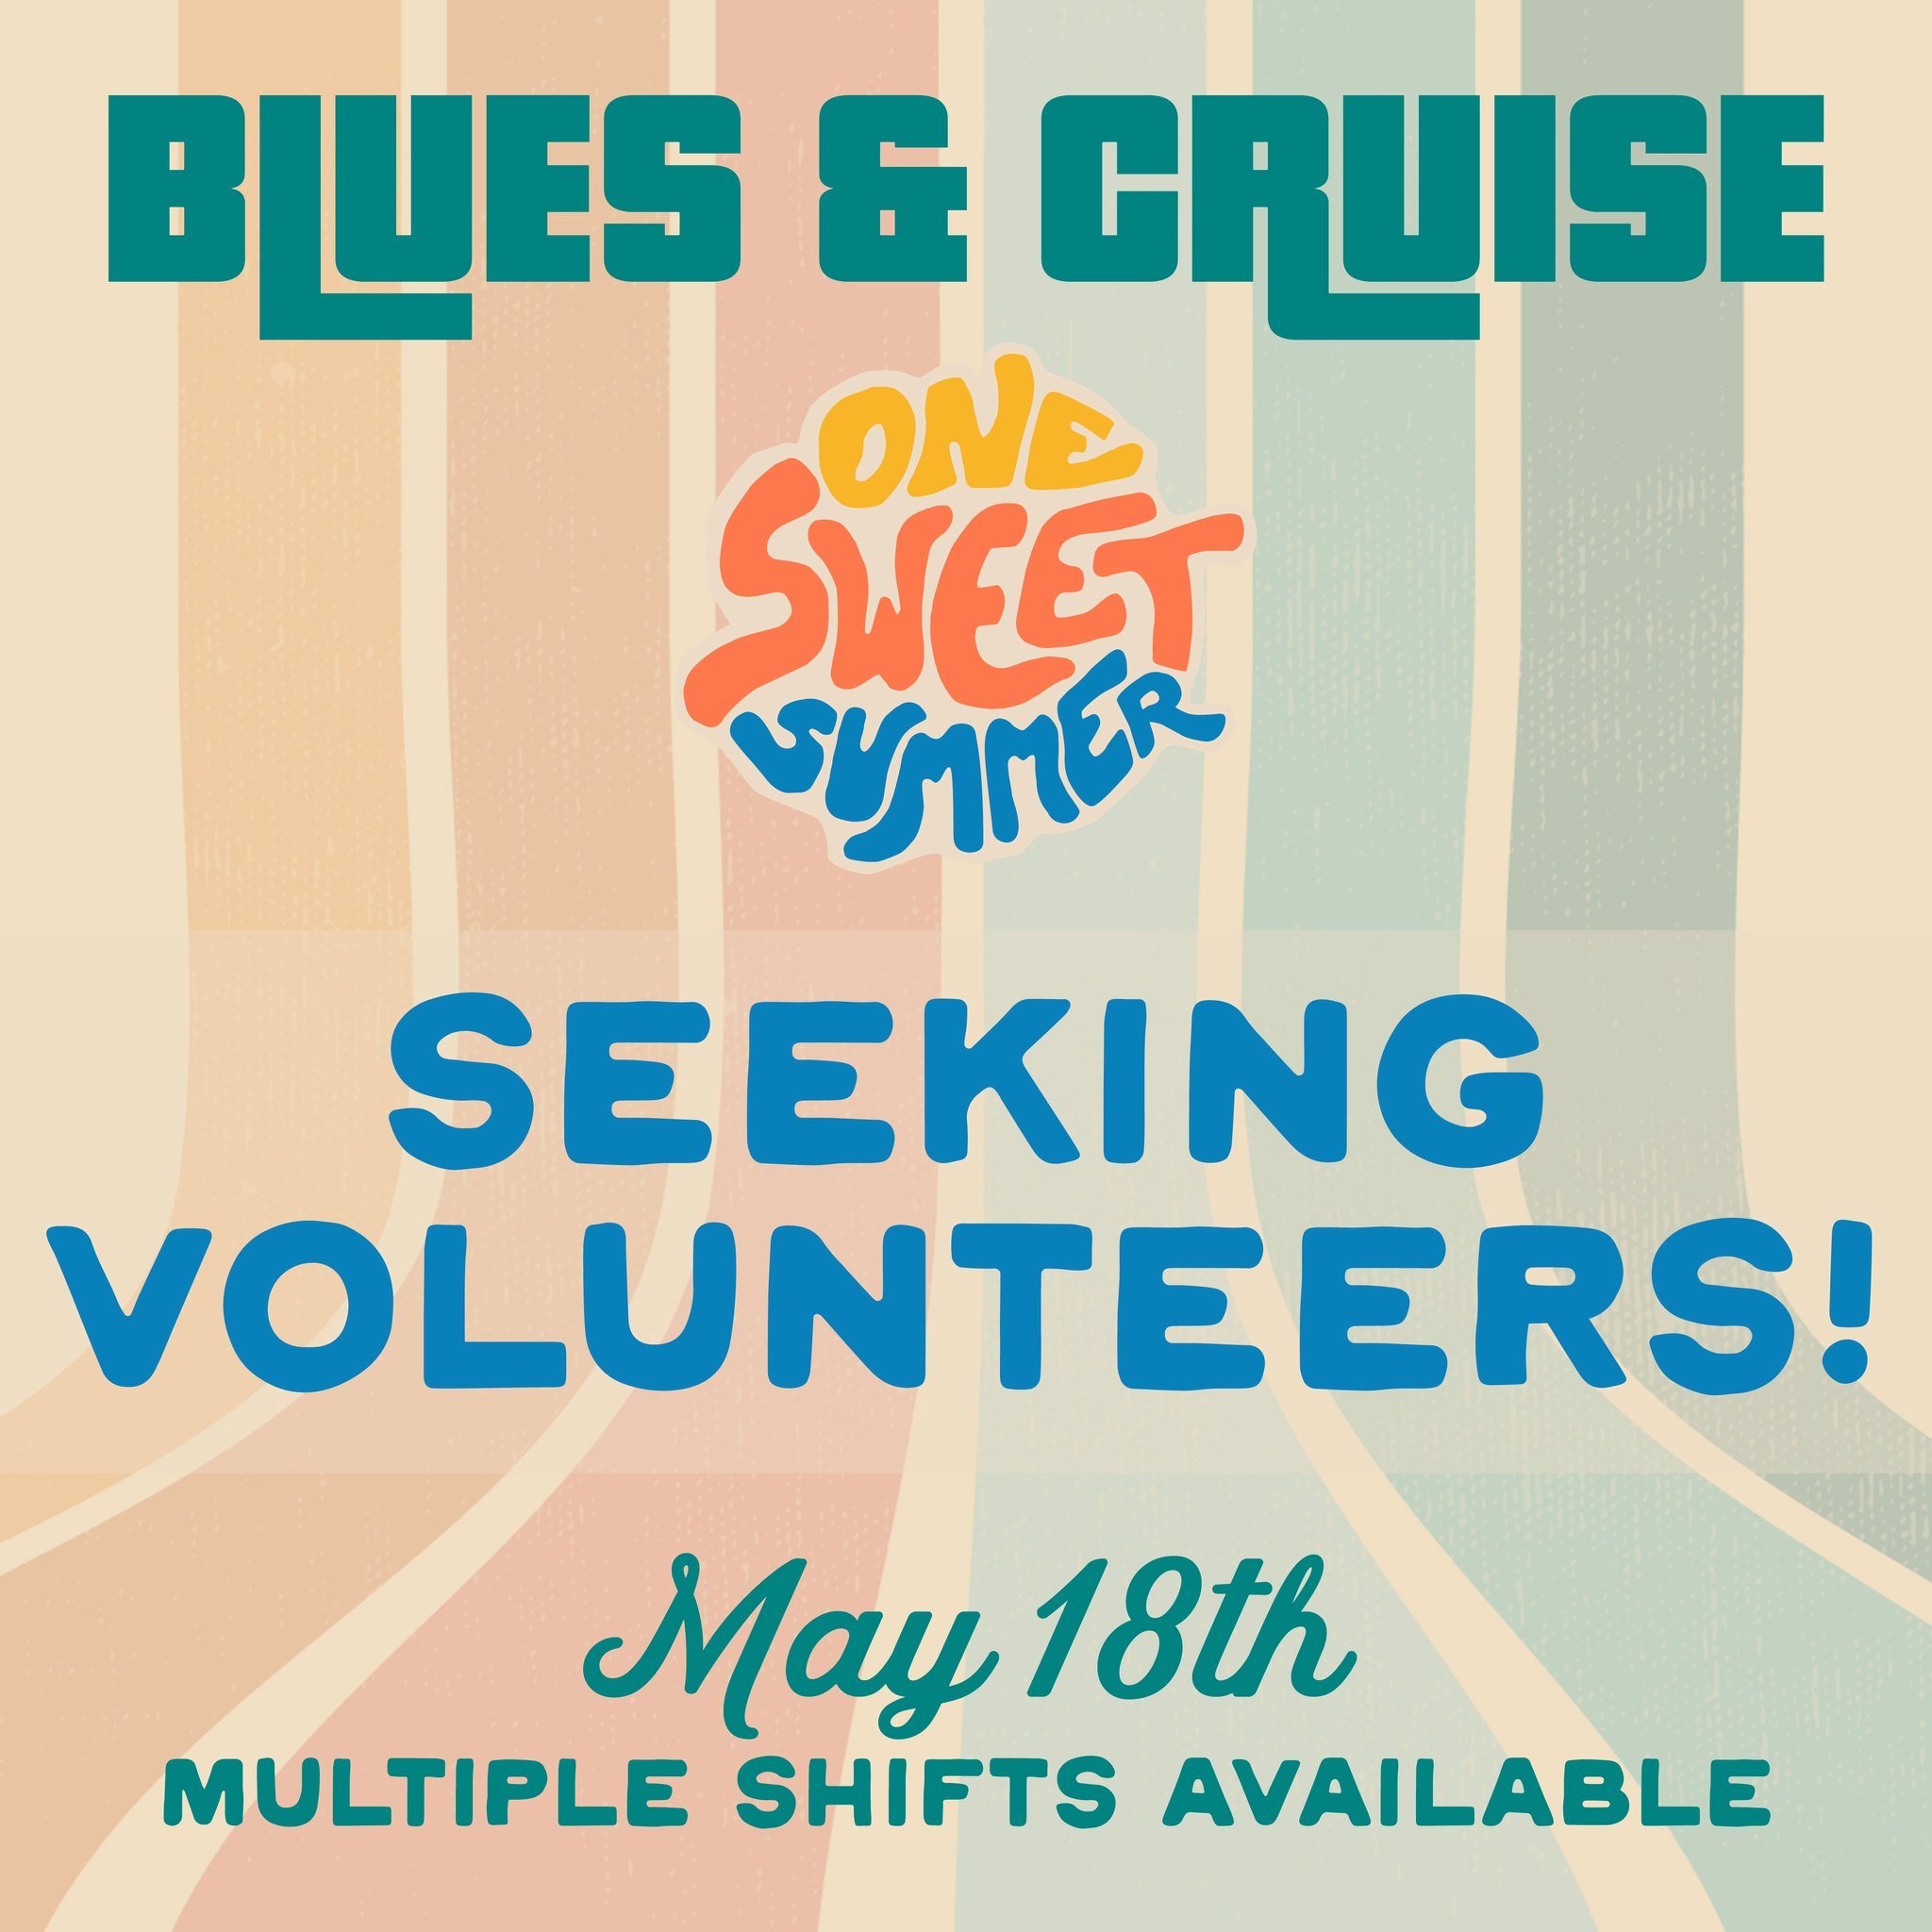 We are looking for a few volunteers for our upcoming Blue &amp; Cruise event on May 18th! There's a link in our bio with more info about what shifts need filled / sign up information. 

If you're interested in other event volunteer opportunities, ple